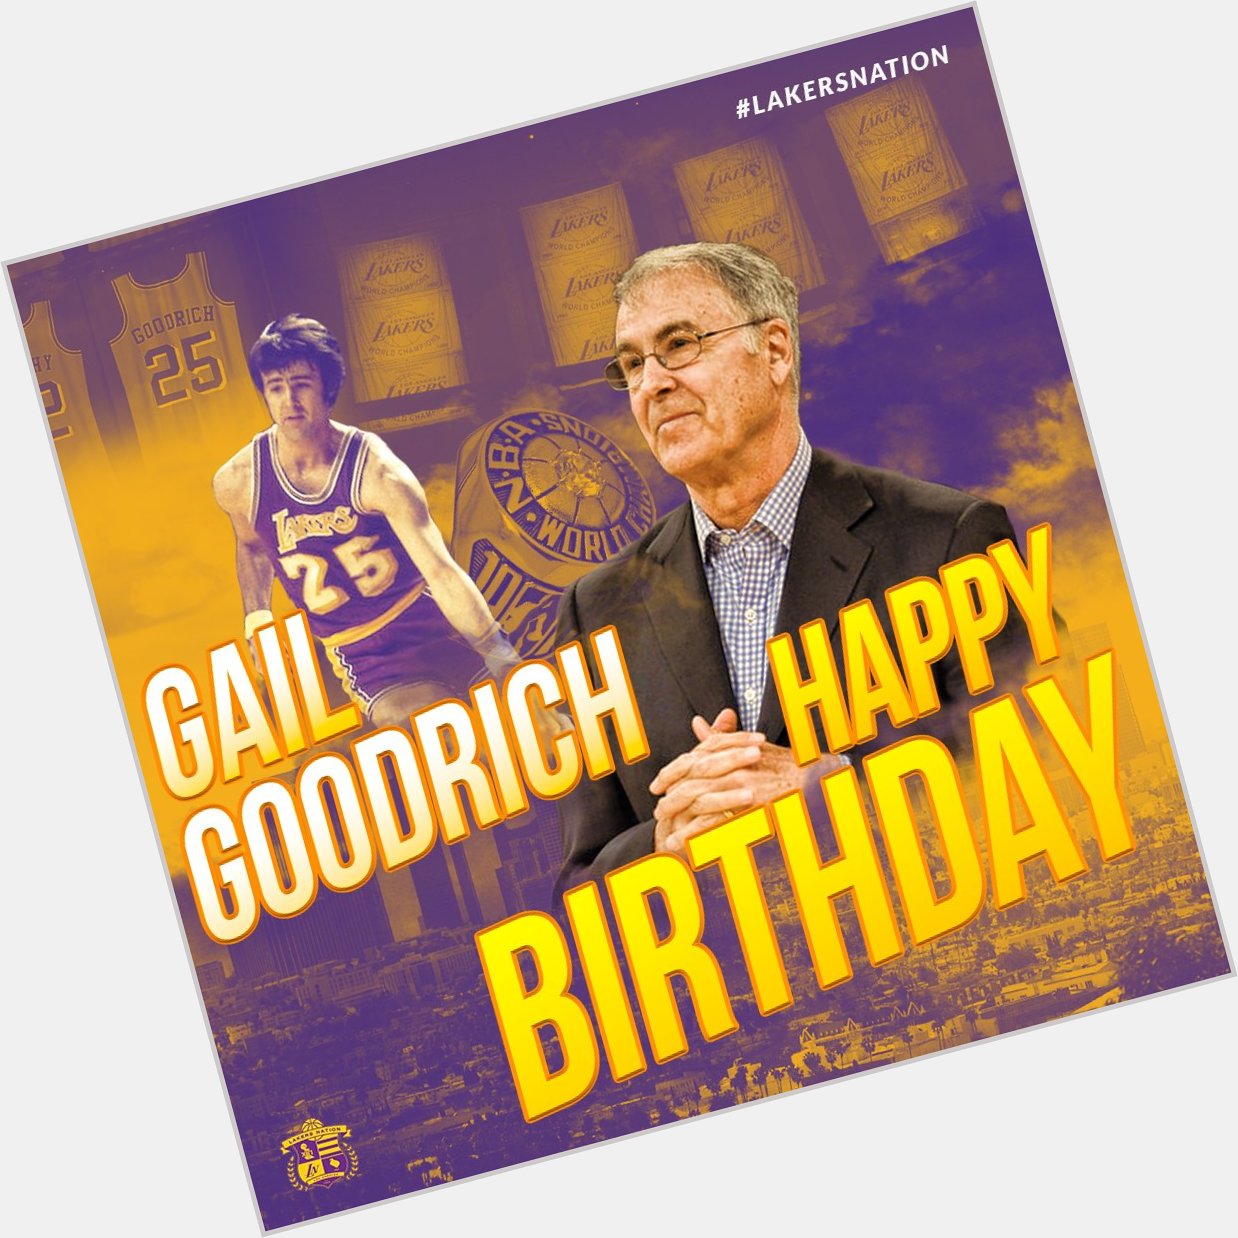 Join us in wishing a Happy Birthday to Hall of Famer and Lakers legend, Gail Goodrich! 